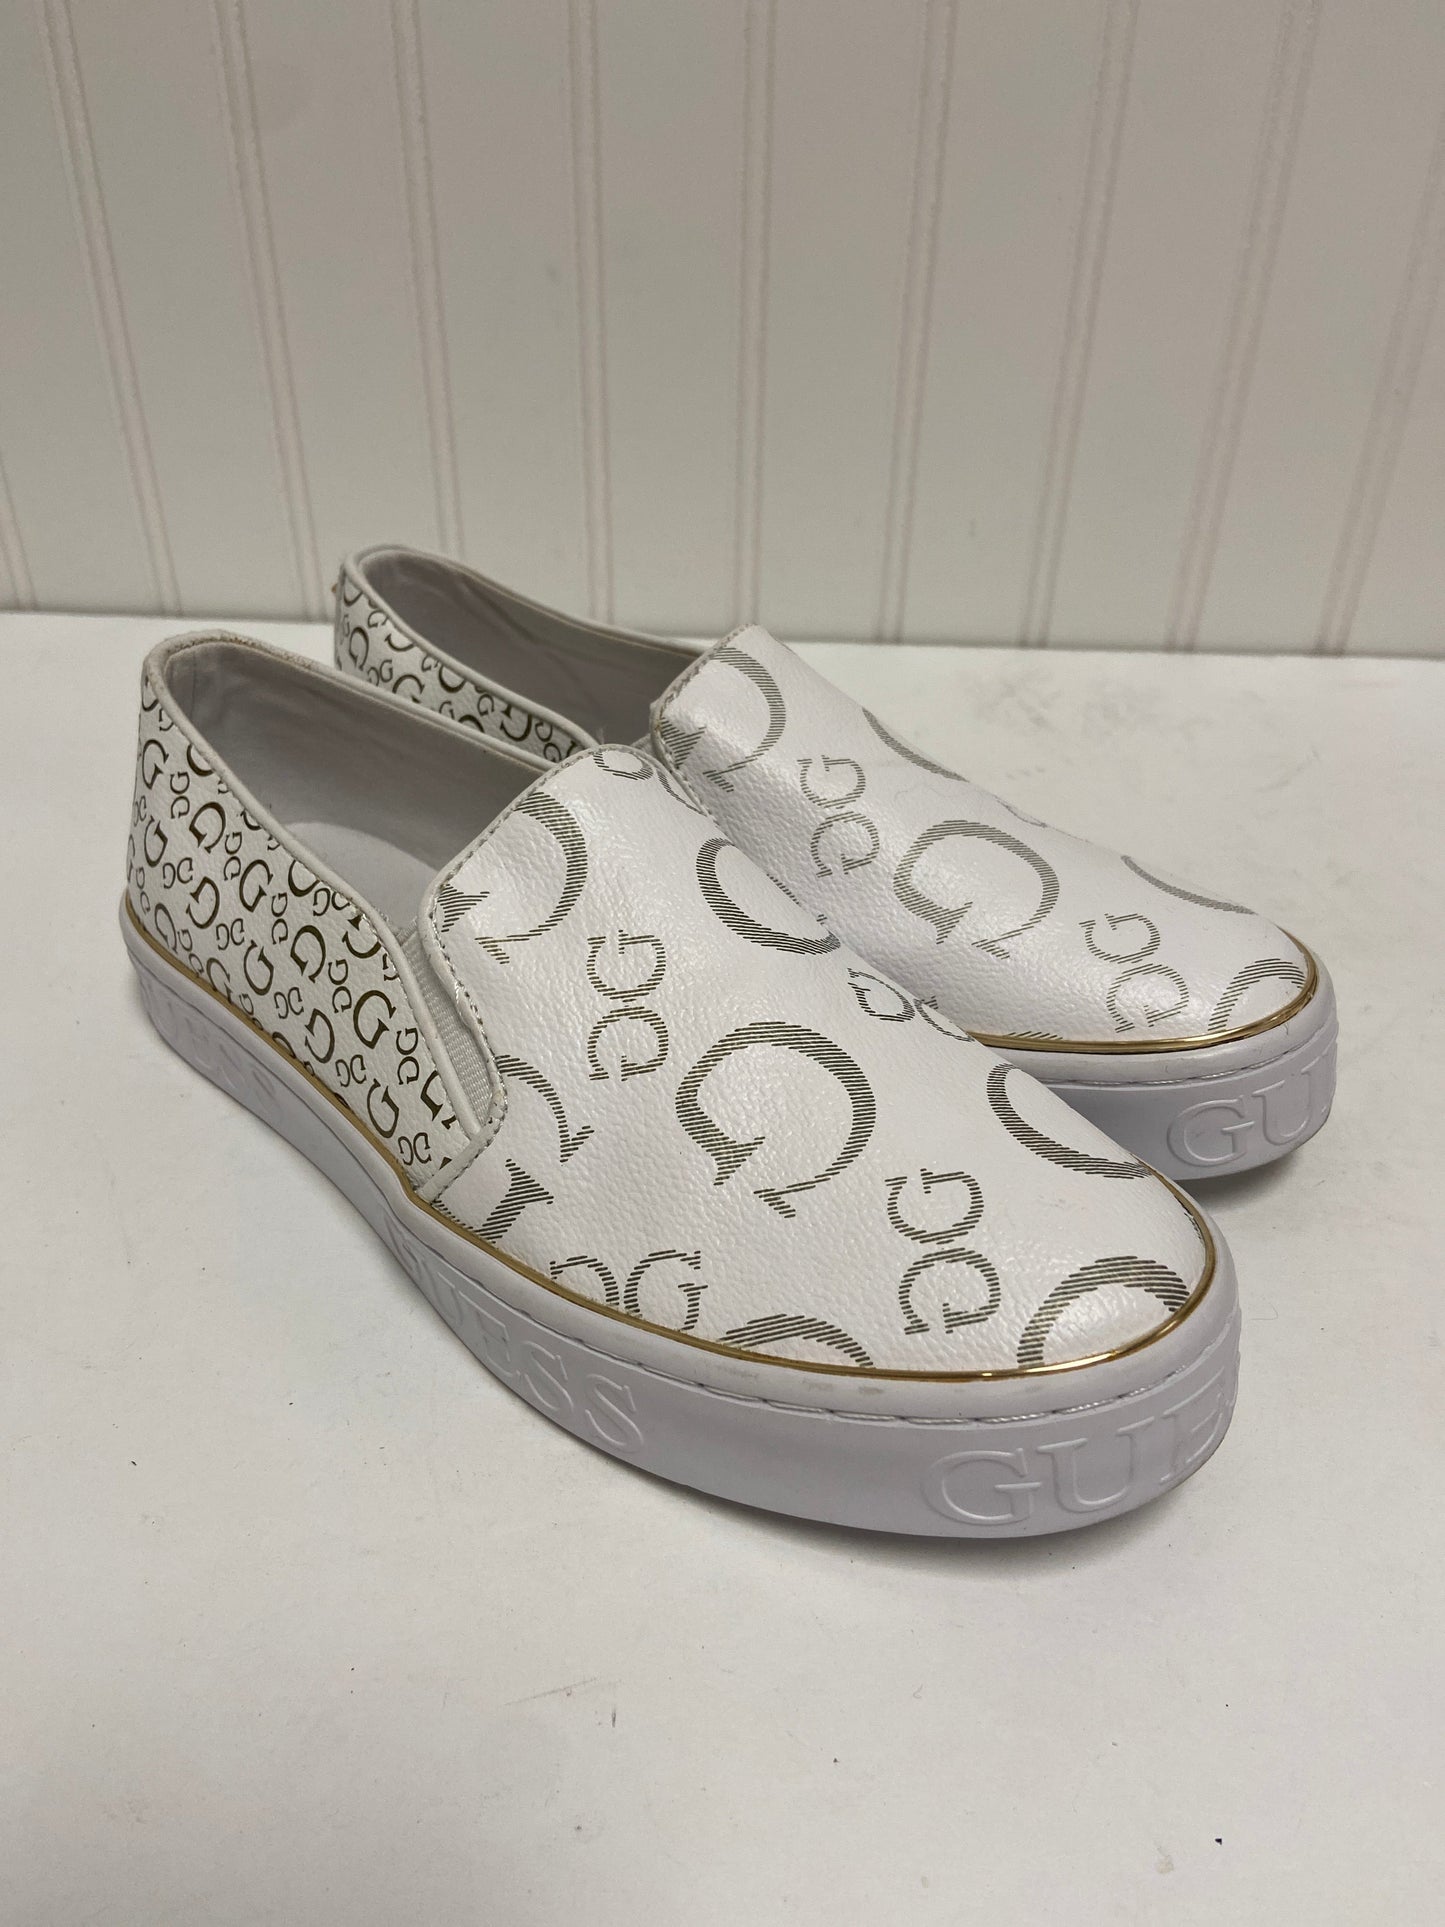 White Shoes Flats Guess, Size 6.5